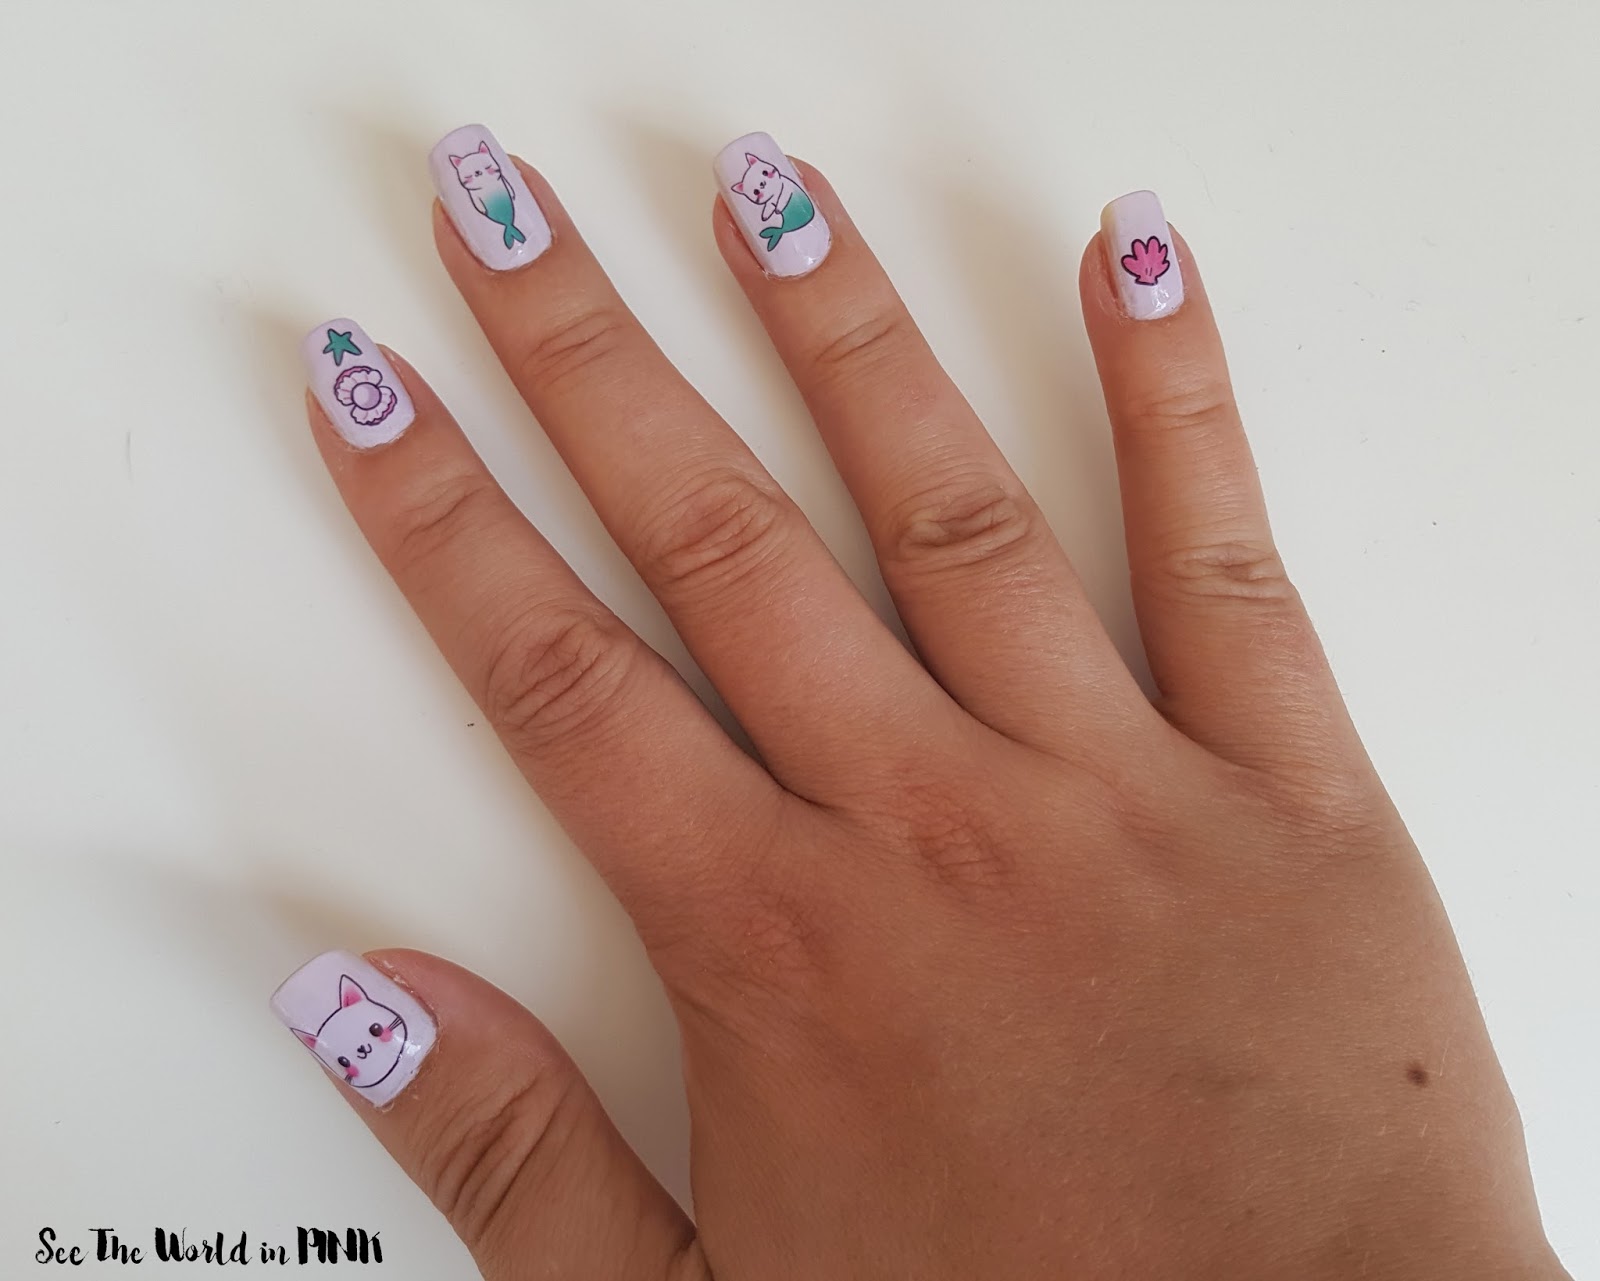 Manicure Tuesday - Purrmaid & Merkittens Nail Decals! 